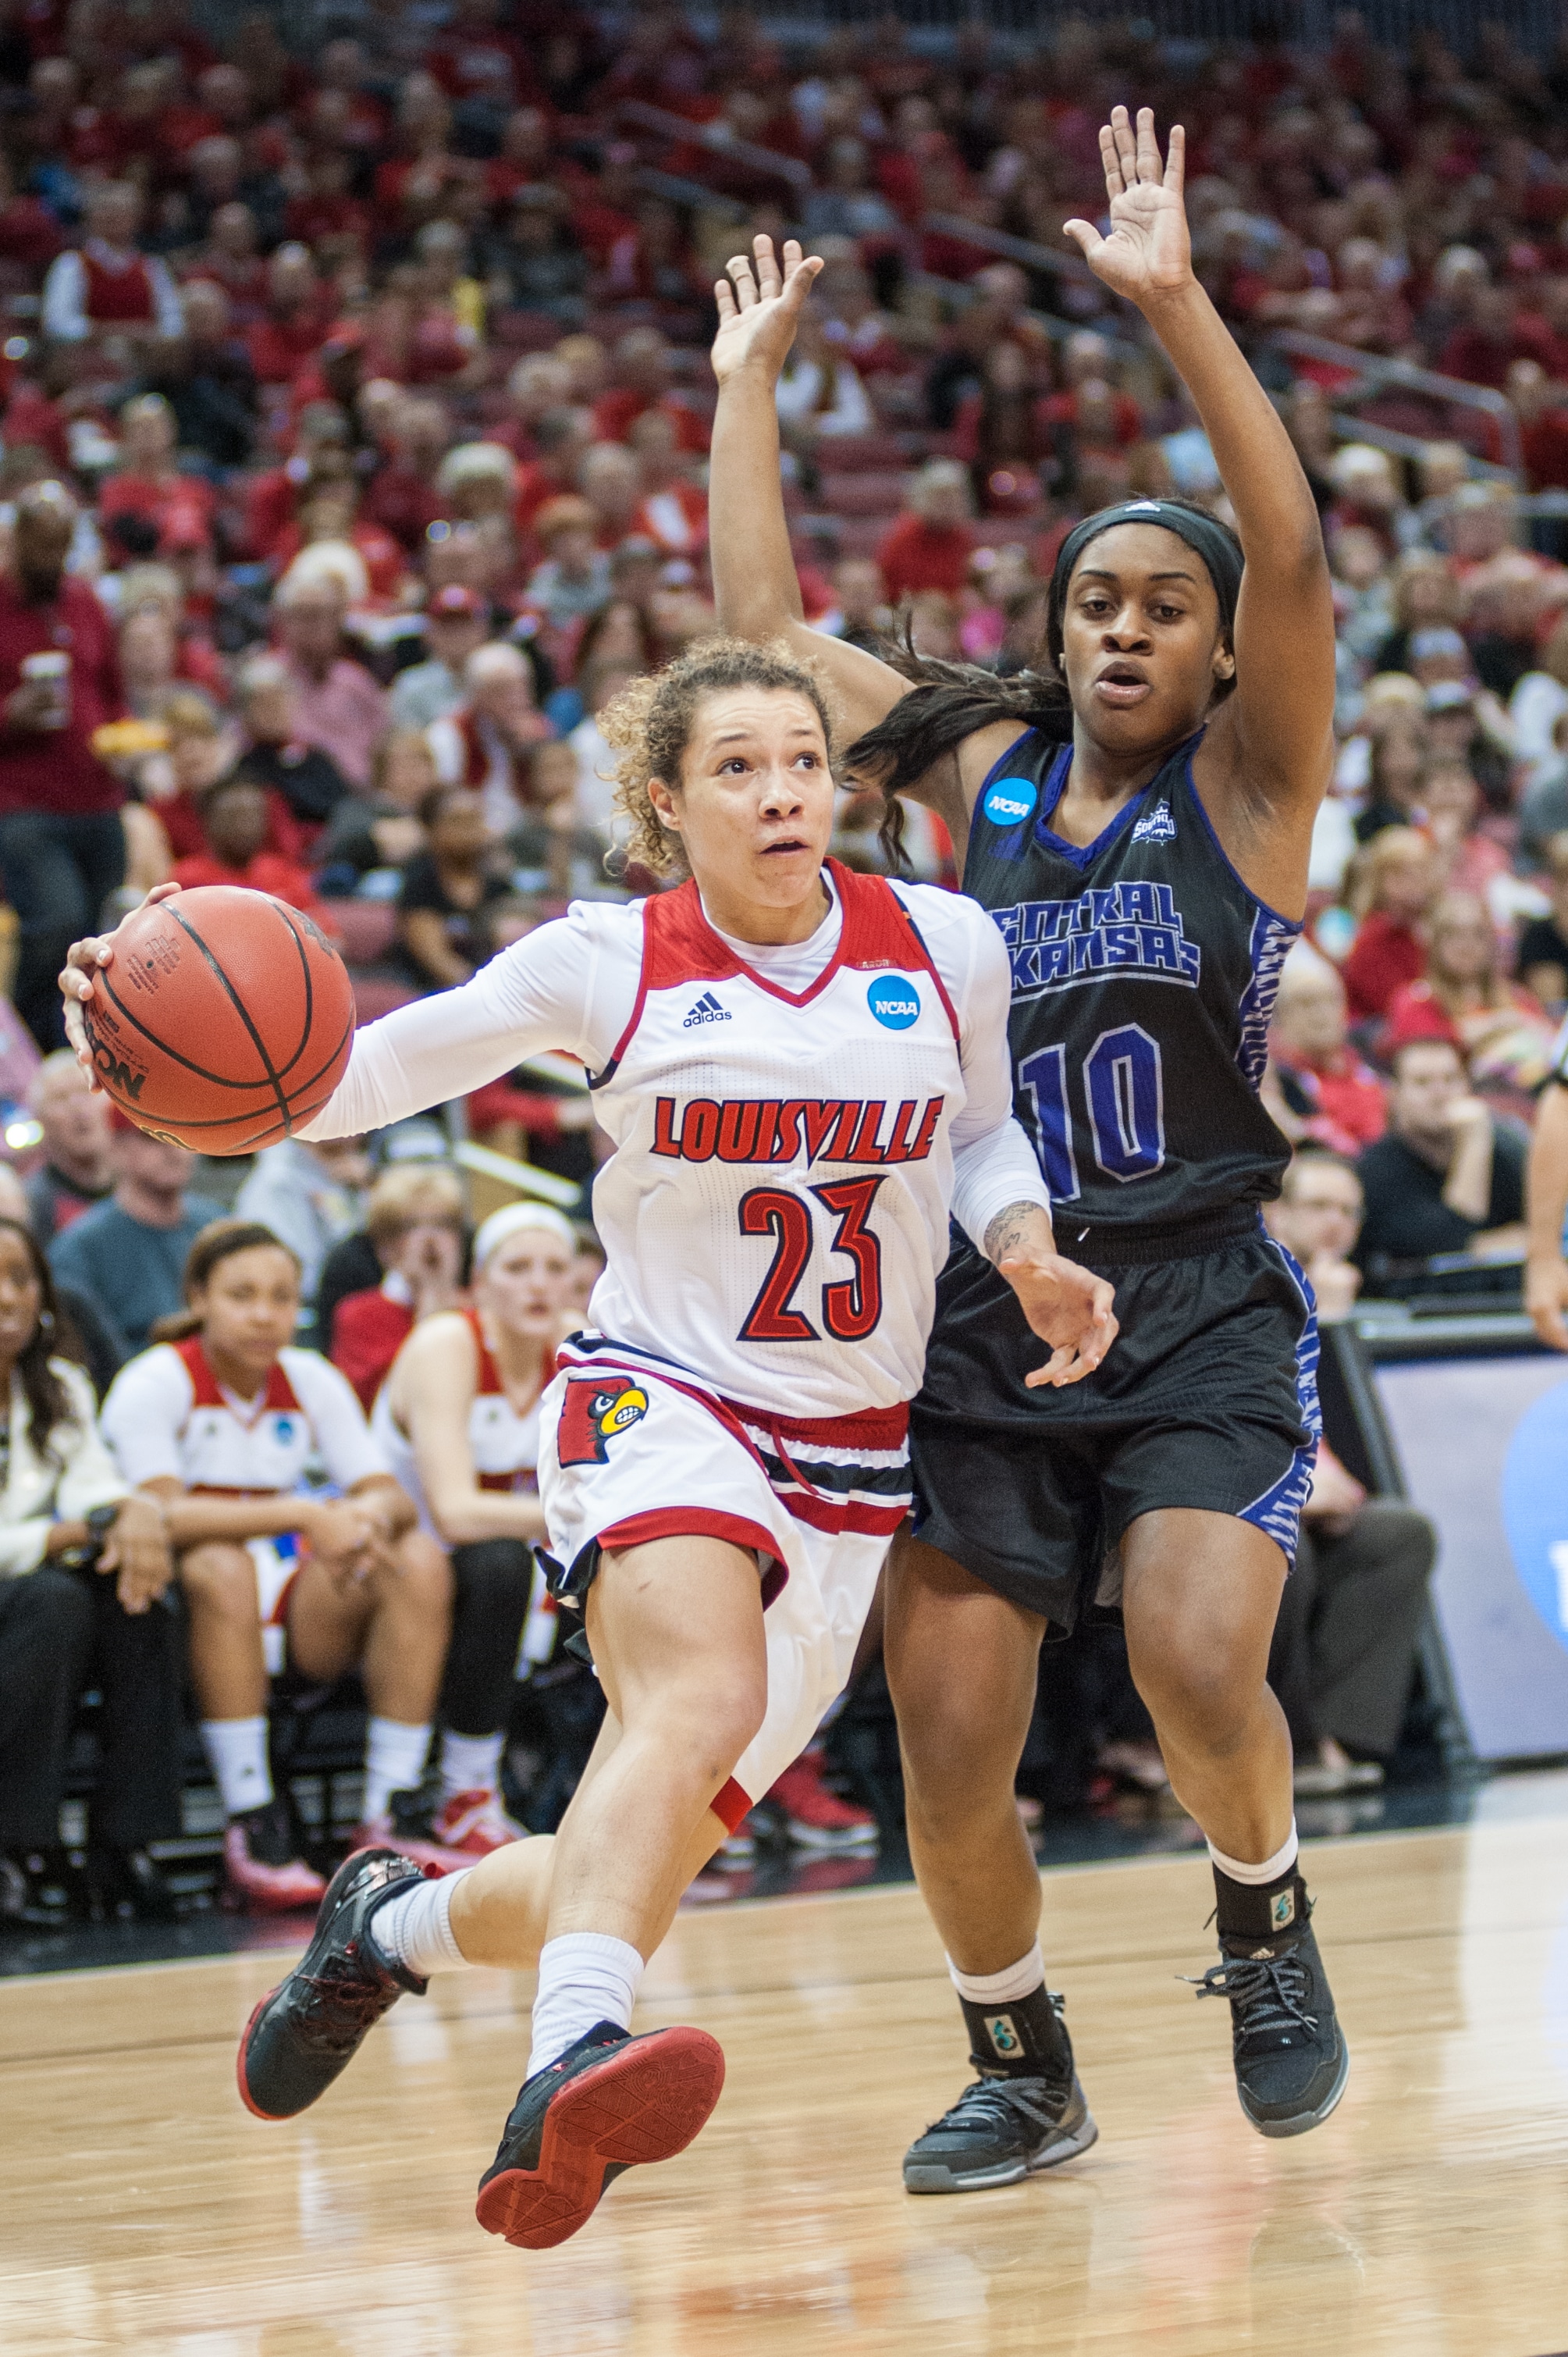 Women’s basketball dominates in first round of NCAA tournament The